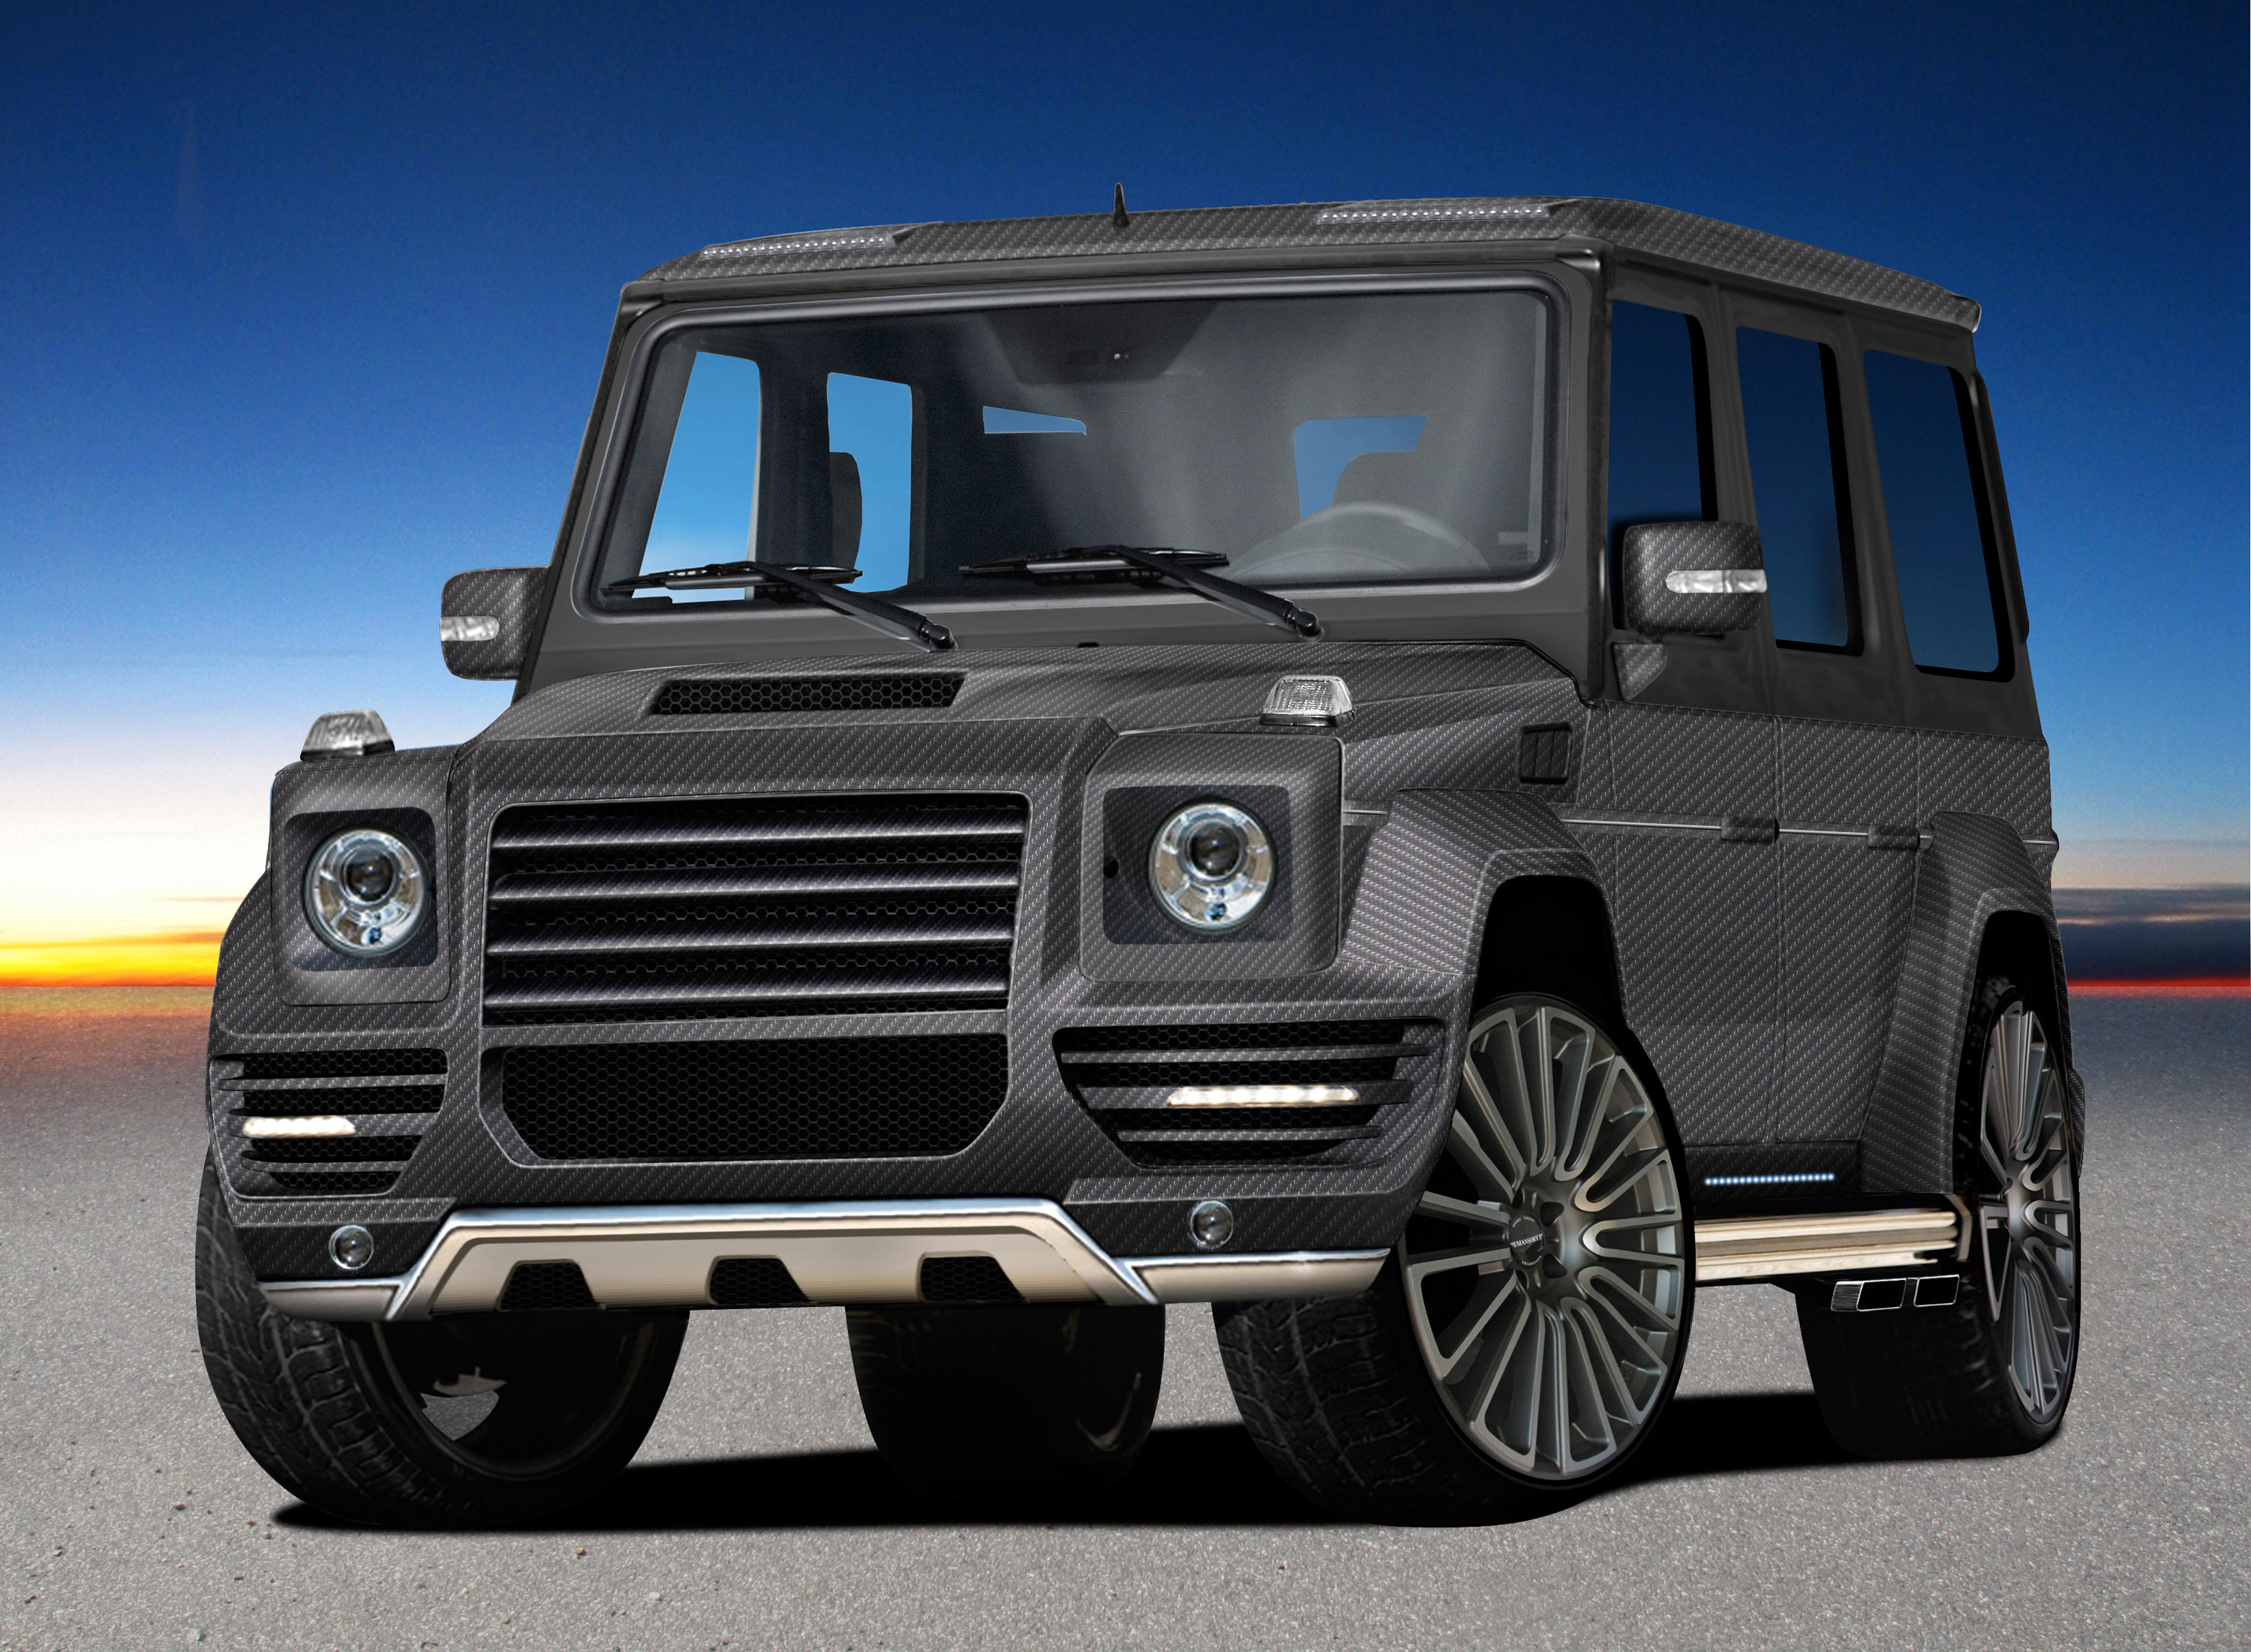 Mansory Mercedes G-Couture